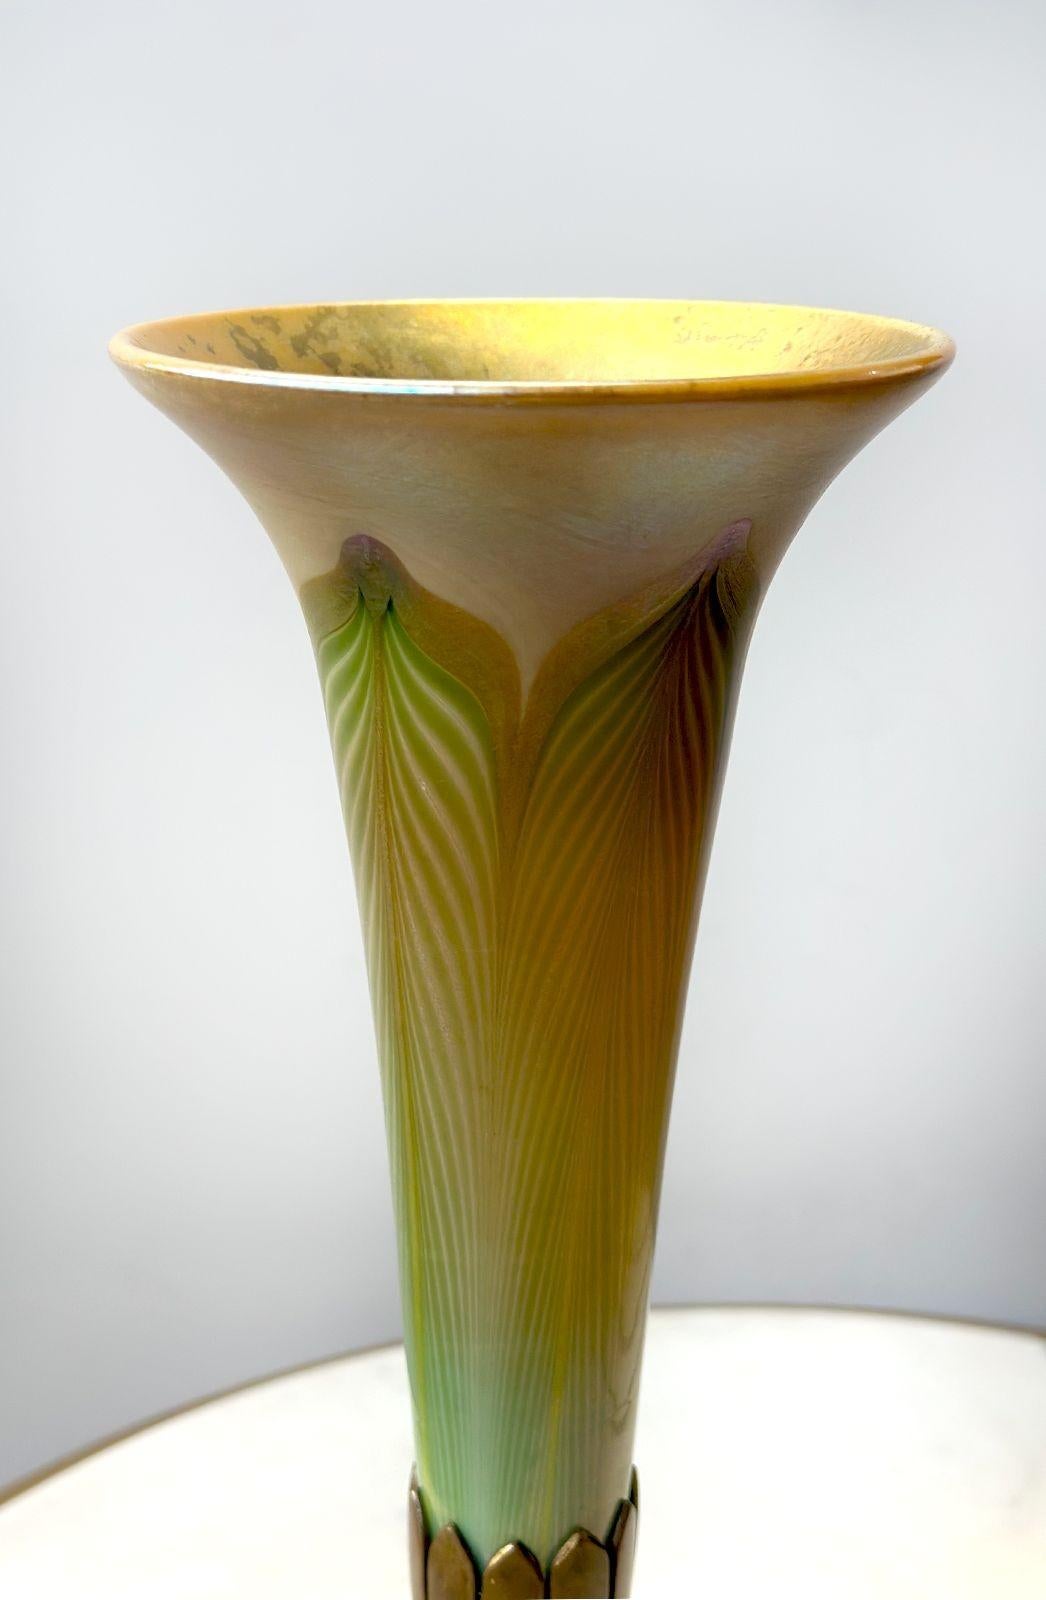 Gorgeous pulled feather design Favrile glass vase by Tiffany Studios in a unique trumpet shape. The alluring favrile glass is made with gold and green tones that blend perfectly with the gilt bronze base that gracefully supports the whole vase. The